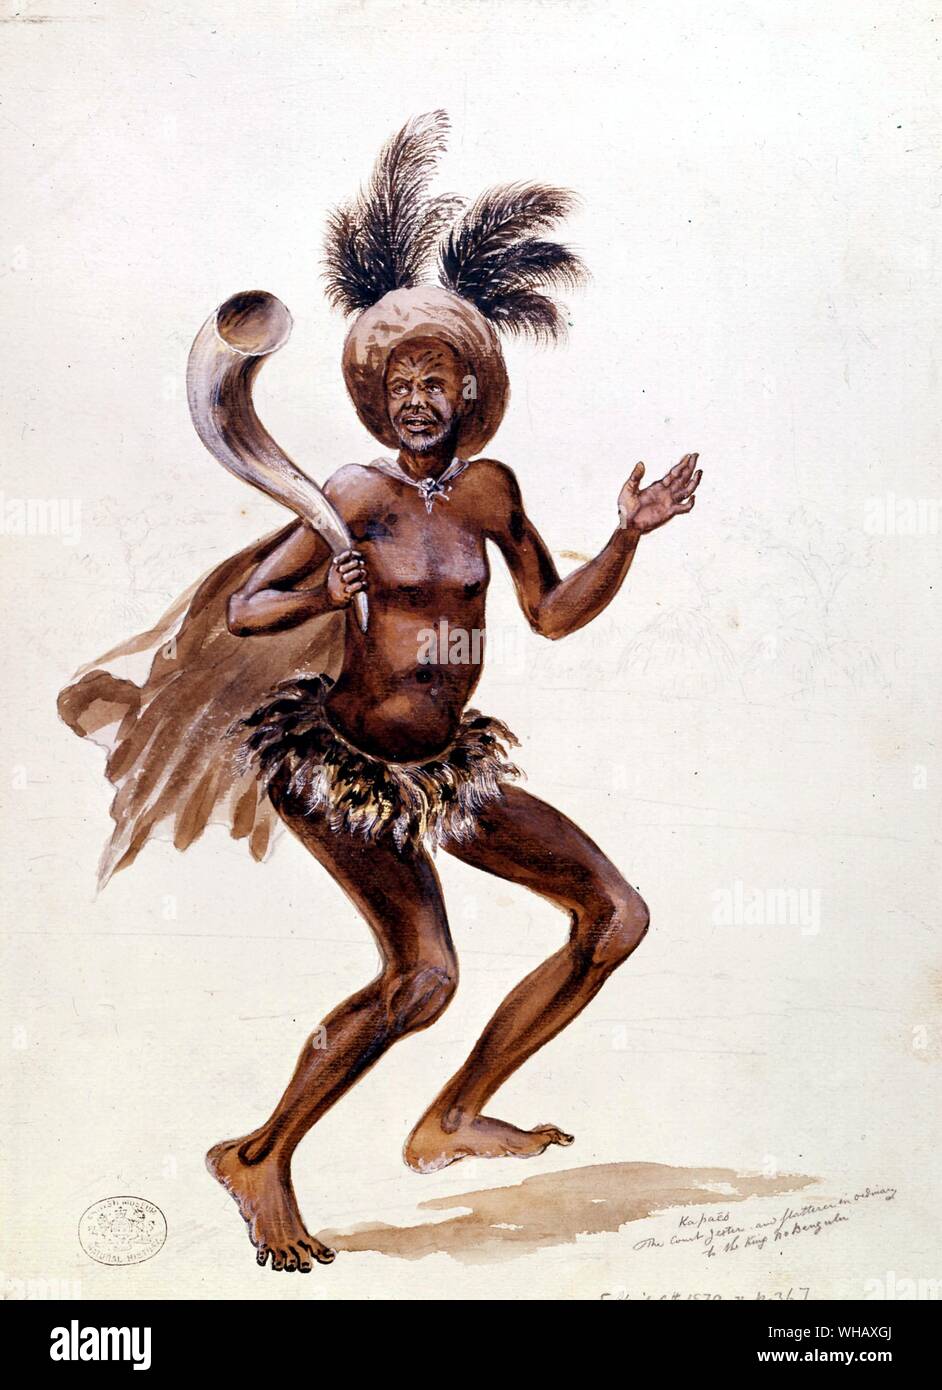 Kafaes Court Jester. The African Adventure - A History of Africa's Explorers by Timothy Severin, page 3111. Stock Photo